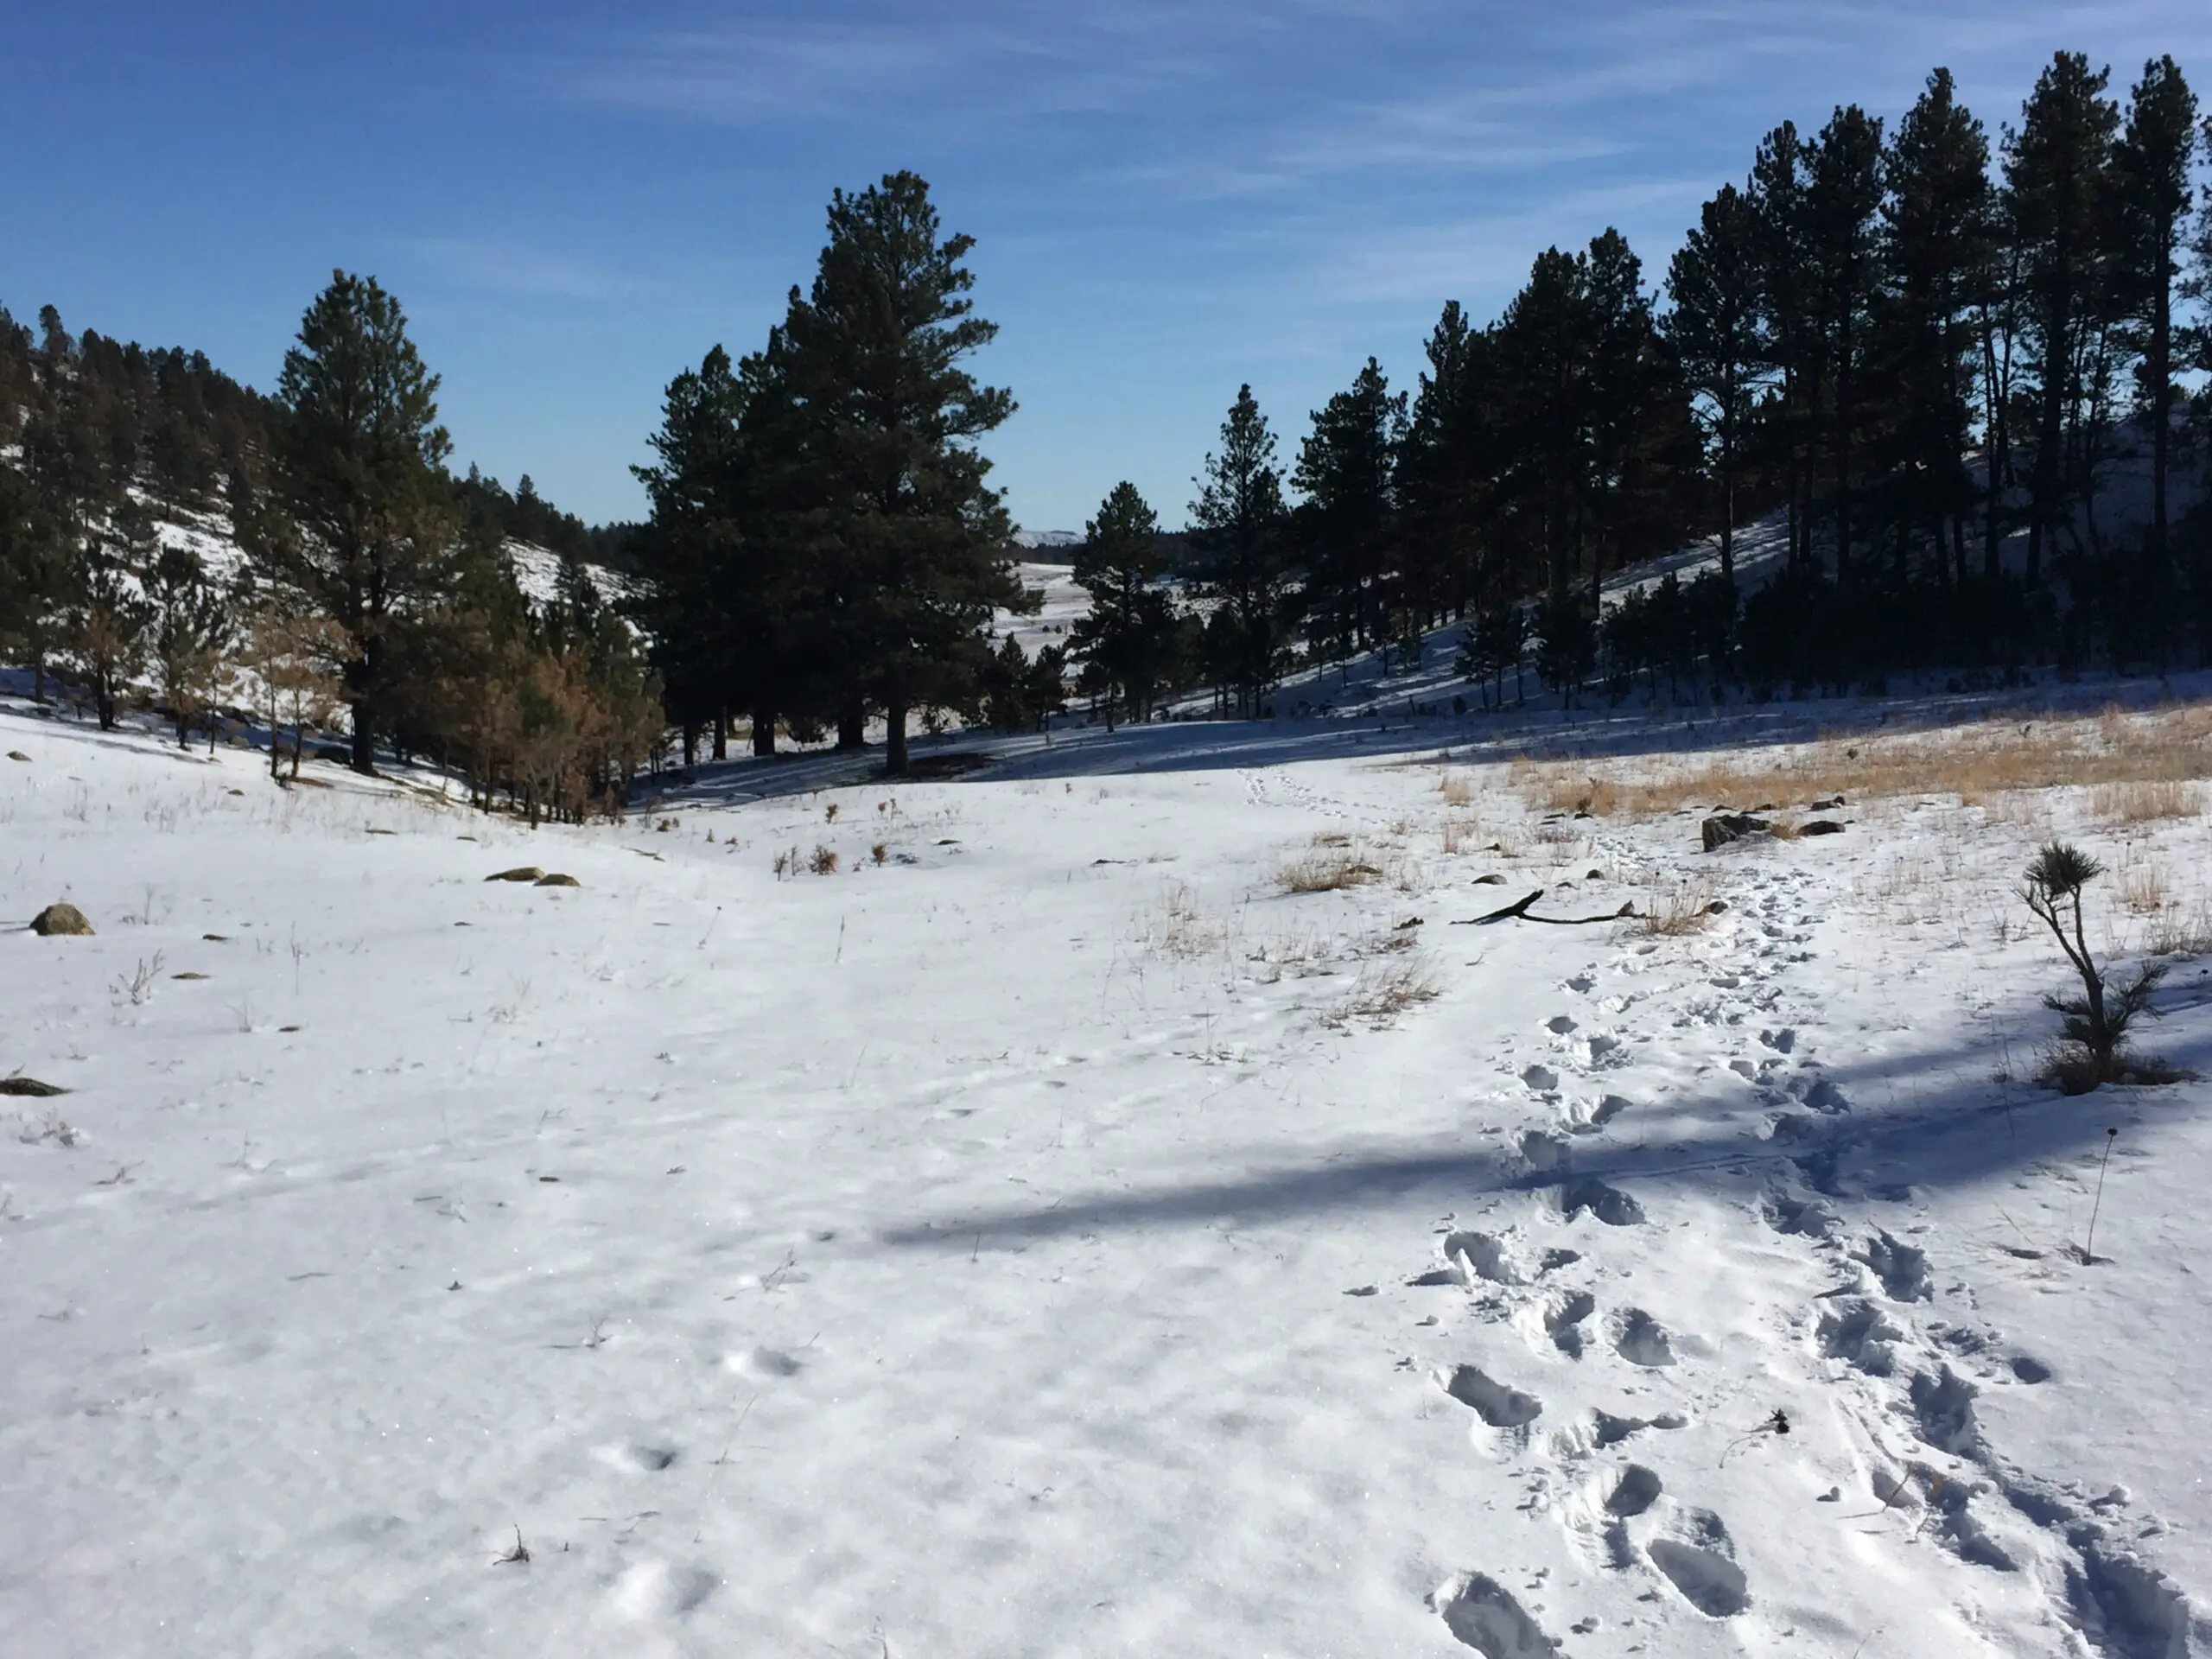 Snow-covered meadow in the foreground; green, pine trees in the background, all under a blue sky.